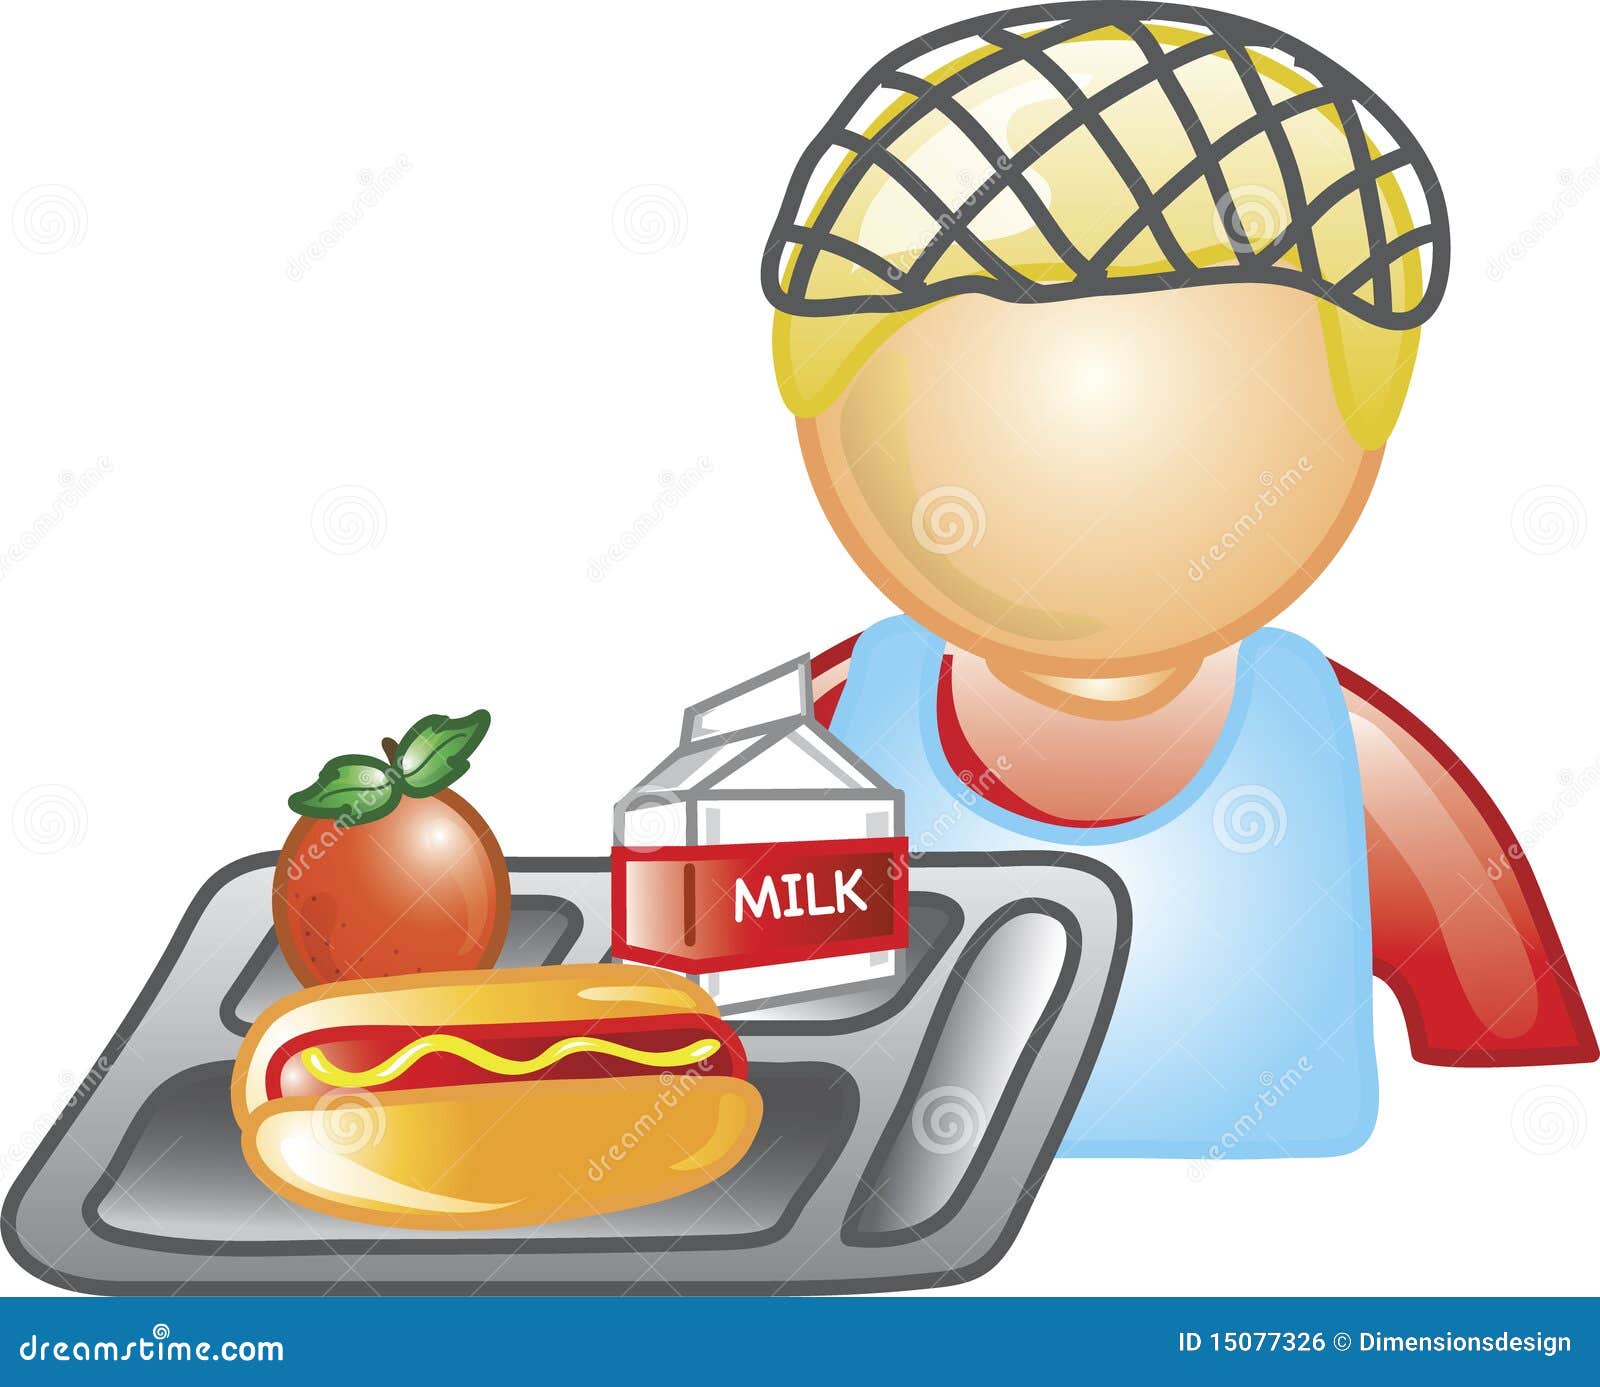 clipart of cafeteria workers - photo #10